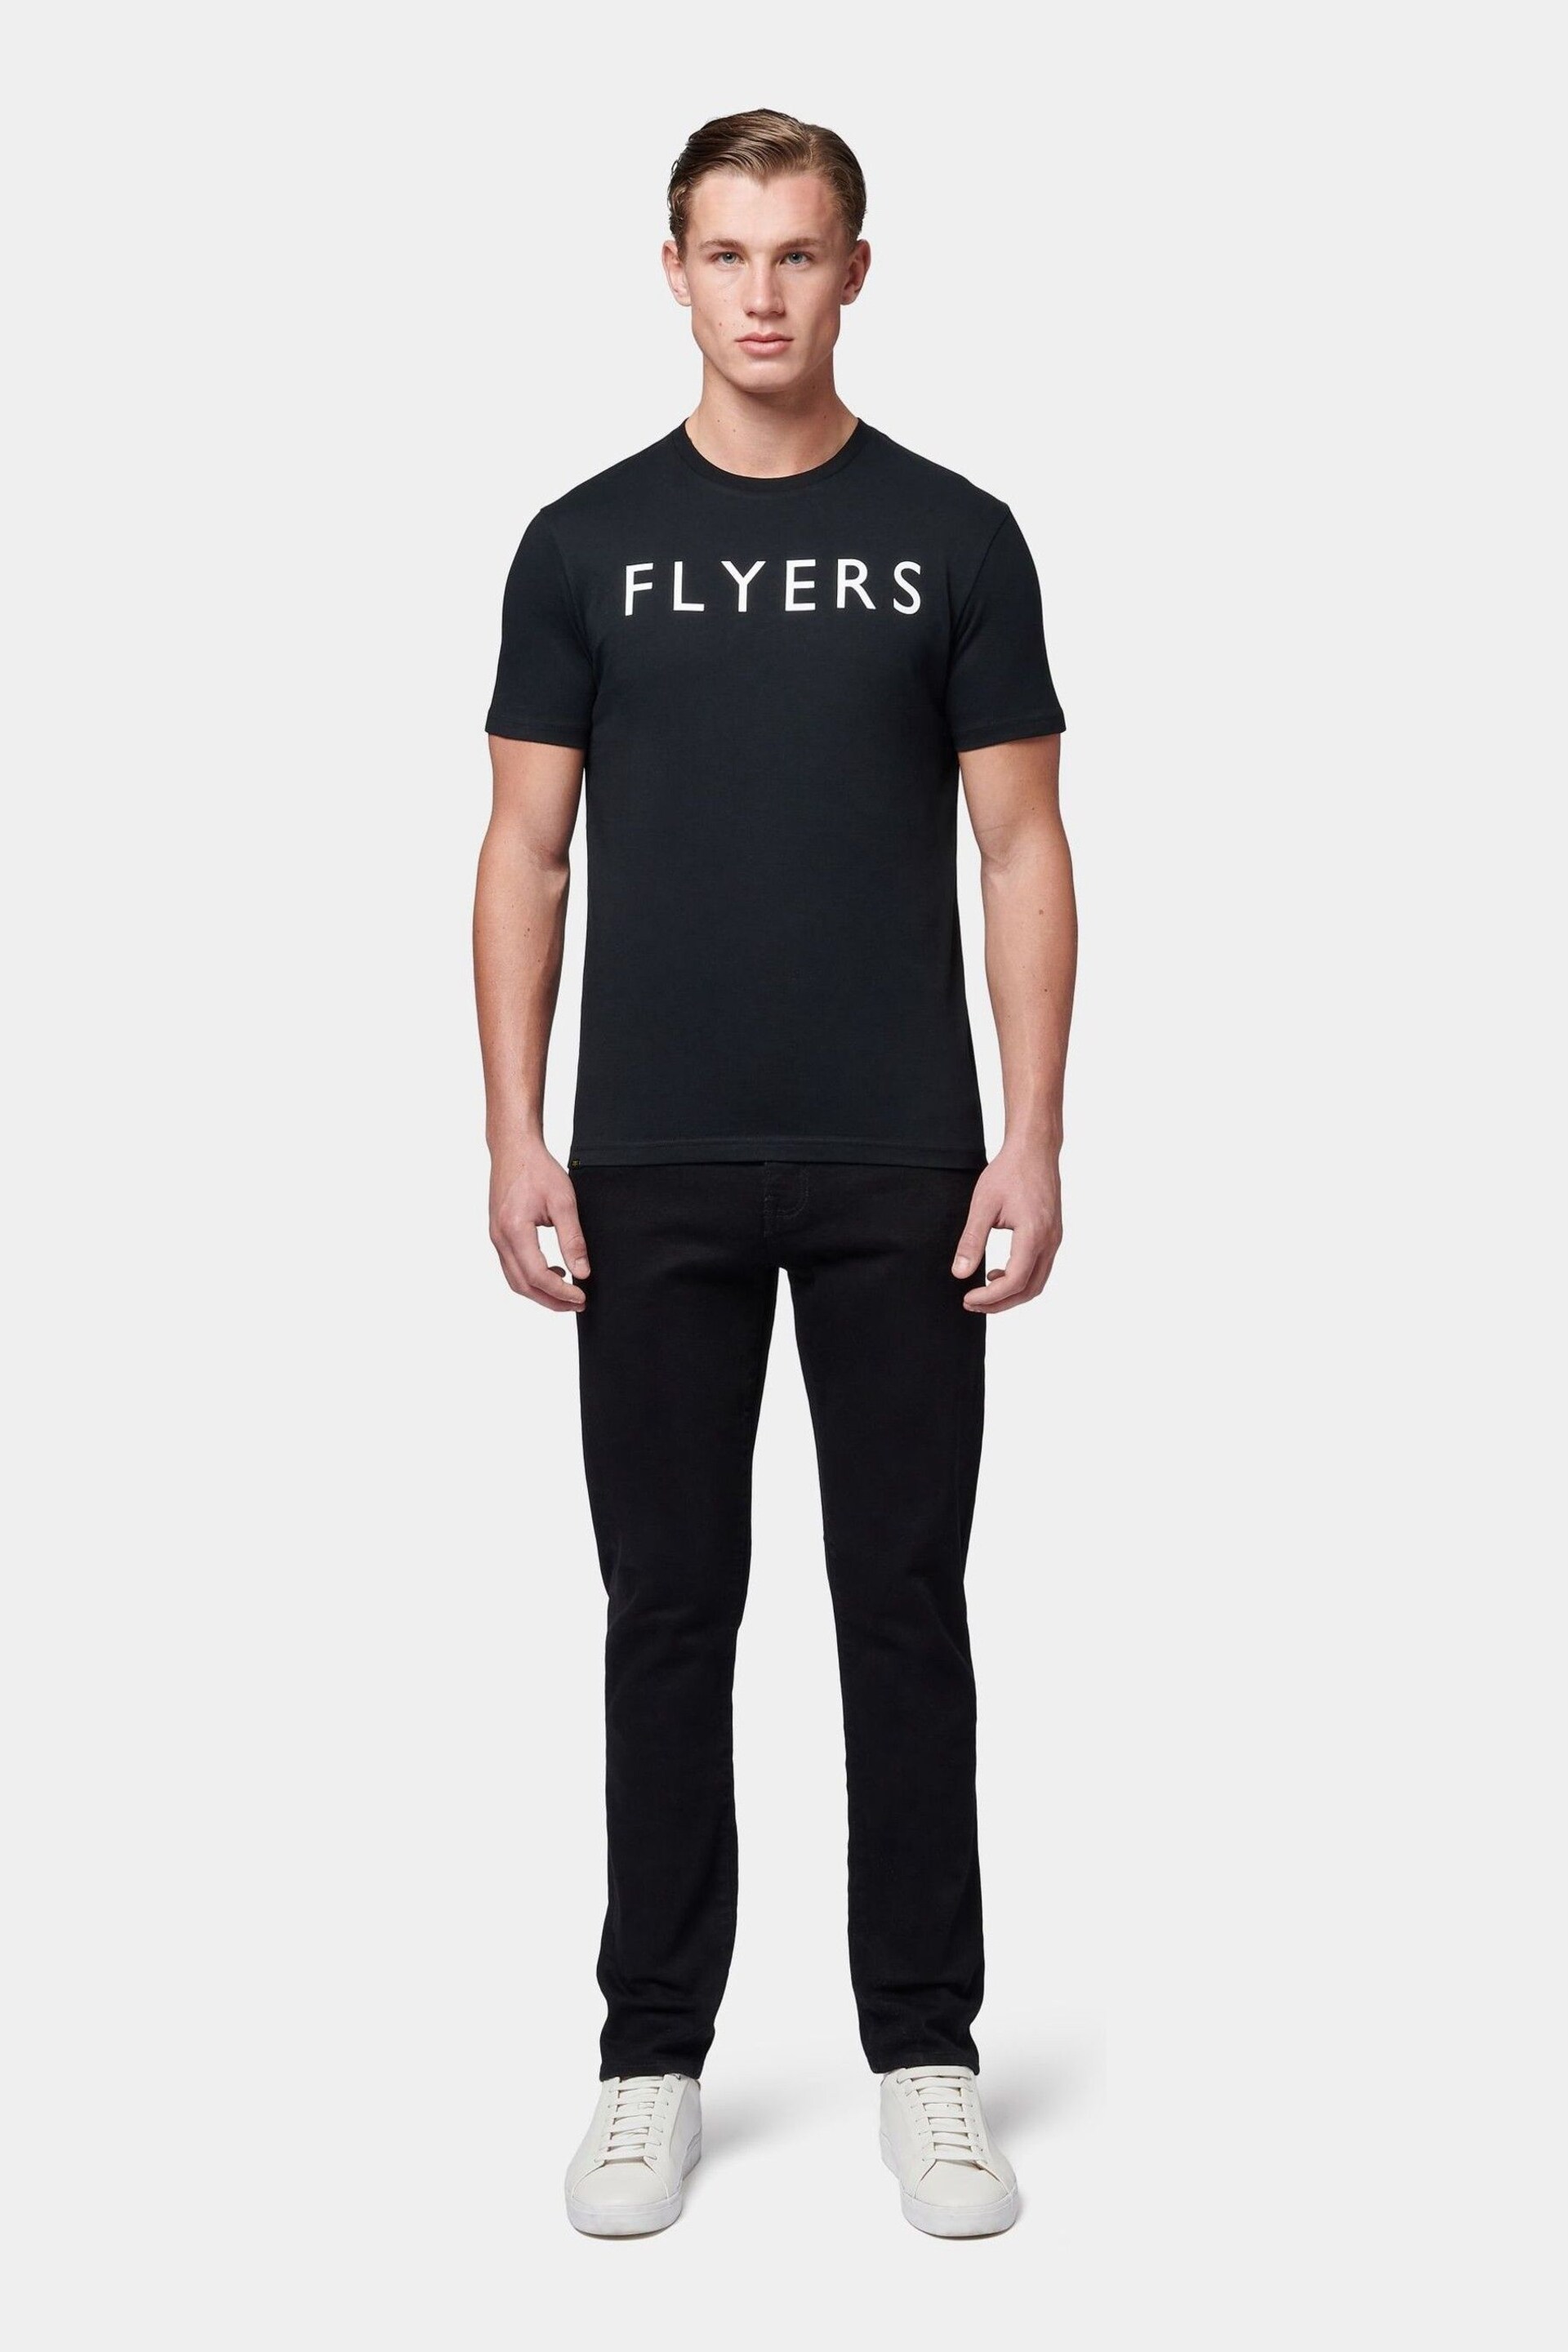 Flyers Mens Classic Fit Text T-Shirt - Image 2 of 8